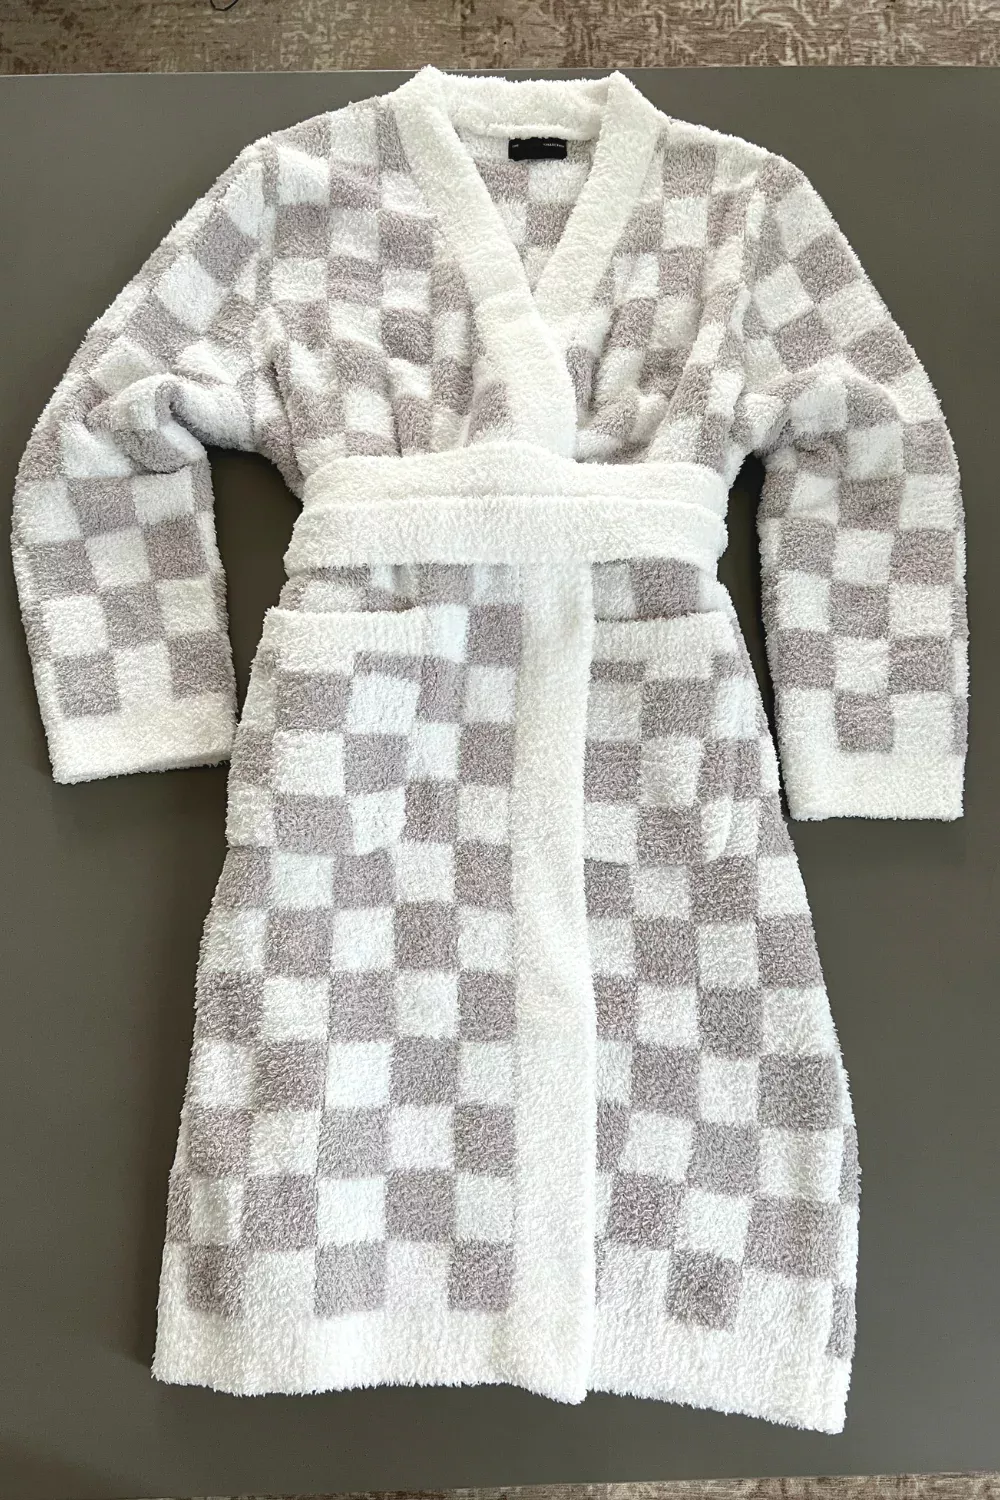 TSC x Madi Nelson: Stars Buttery Robes 2x / Taupe and White